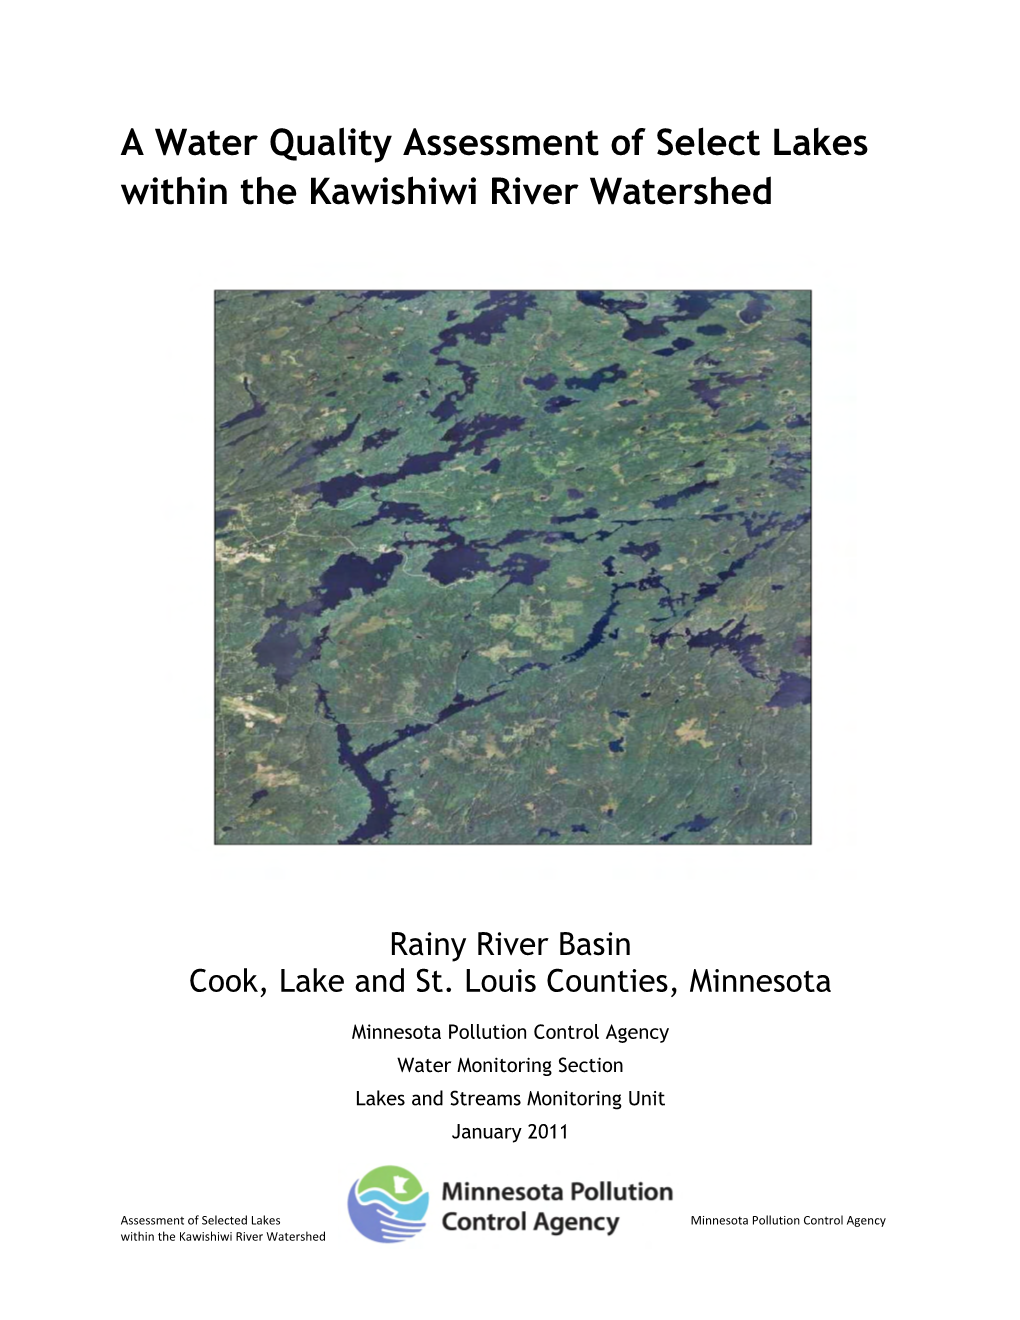 A Water Quality Assessment of Select Lakes Within the Kawishiw River